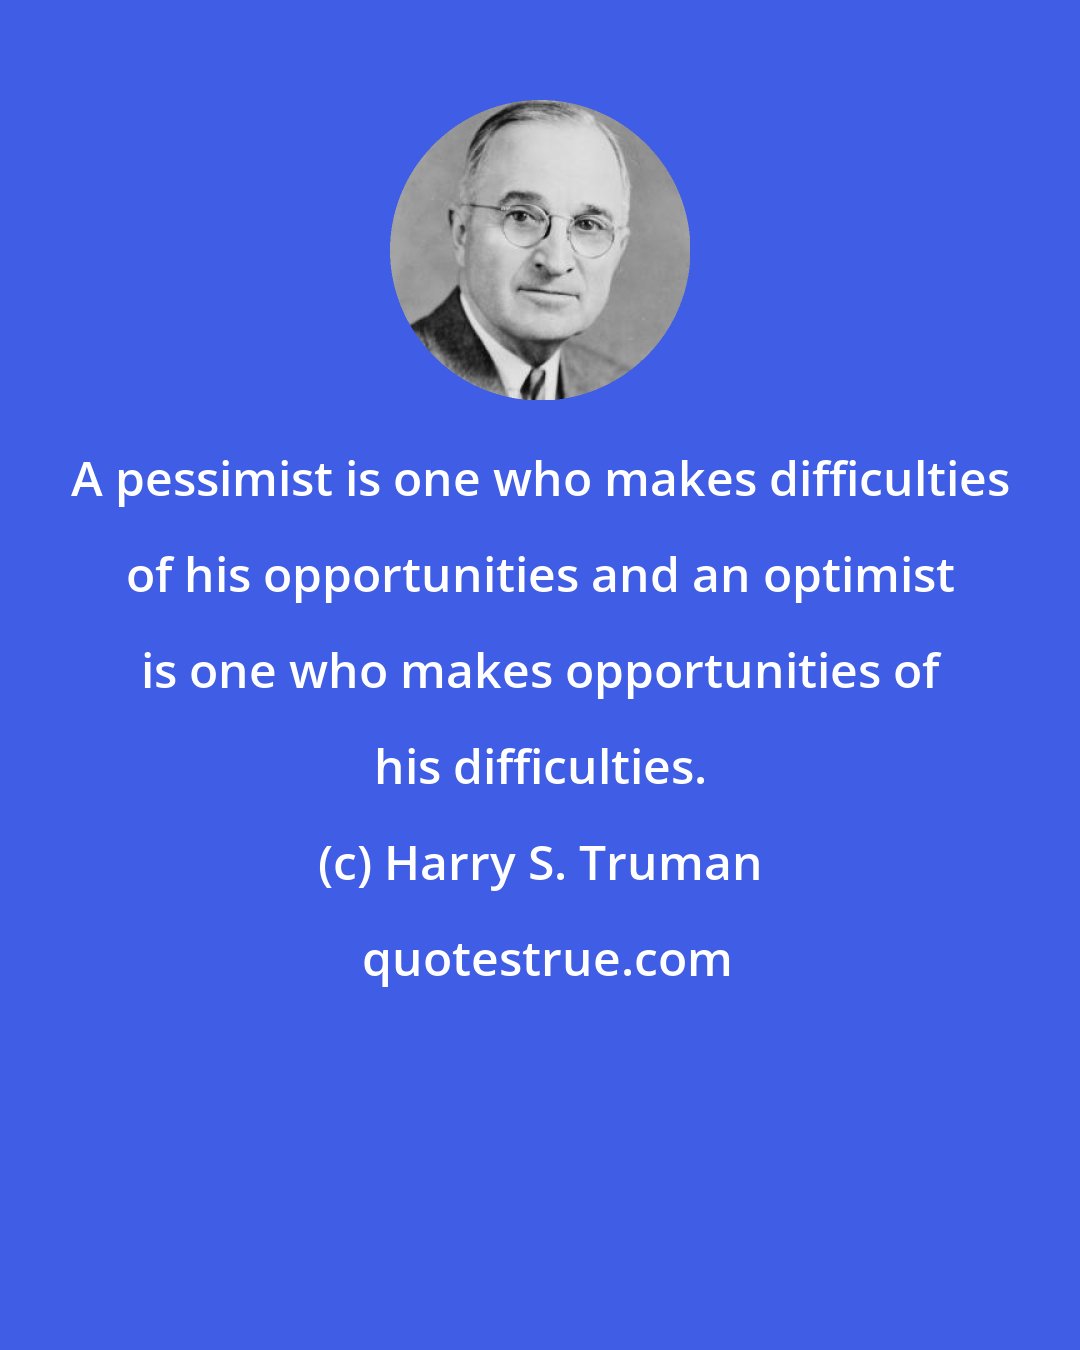 Harry S. Truman: A pessimist is one who makes difficulties of his opportunities and an optimist is one who makes opportunities of his difficulties.